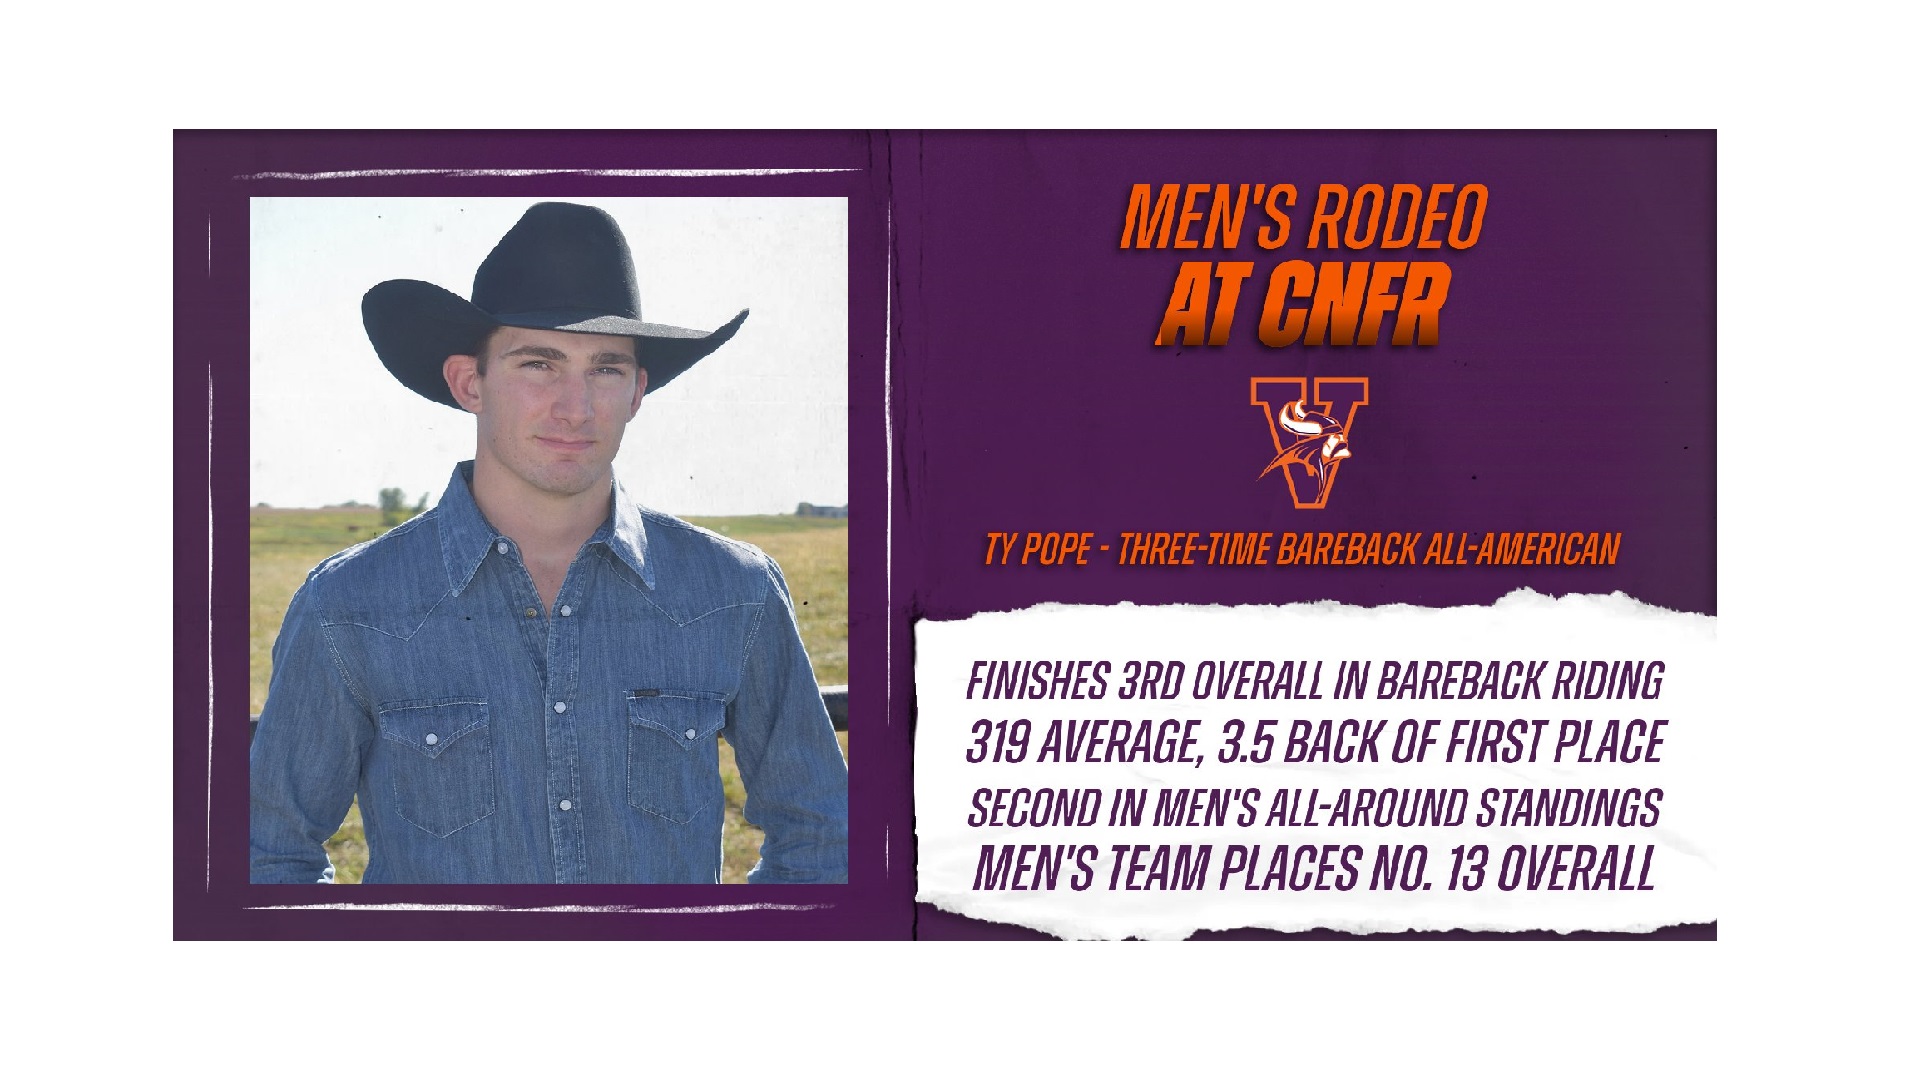 Rodeo Finishes Competitiono at CNFR